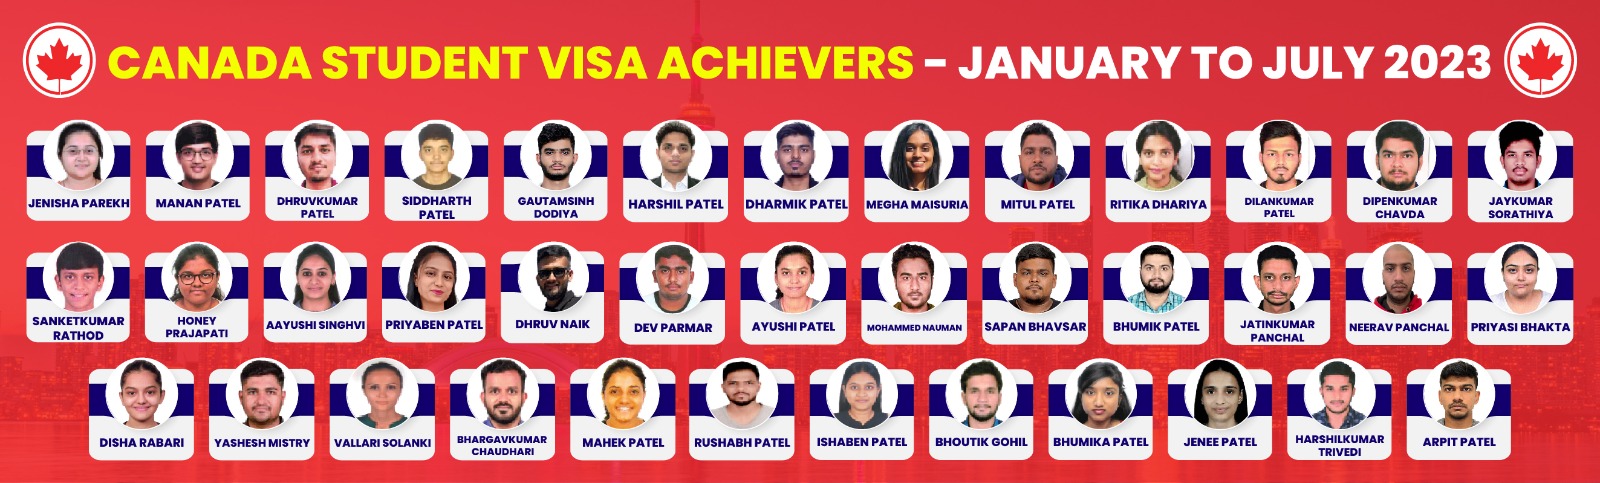 Canada Student Visa Achievers- Jan to July 2023